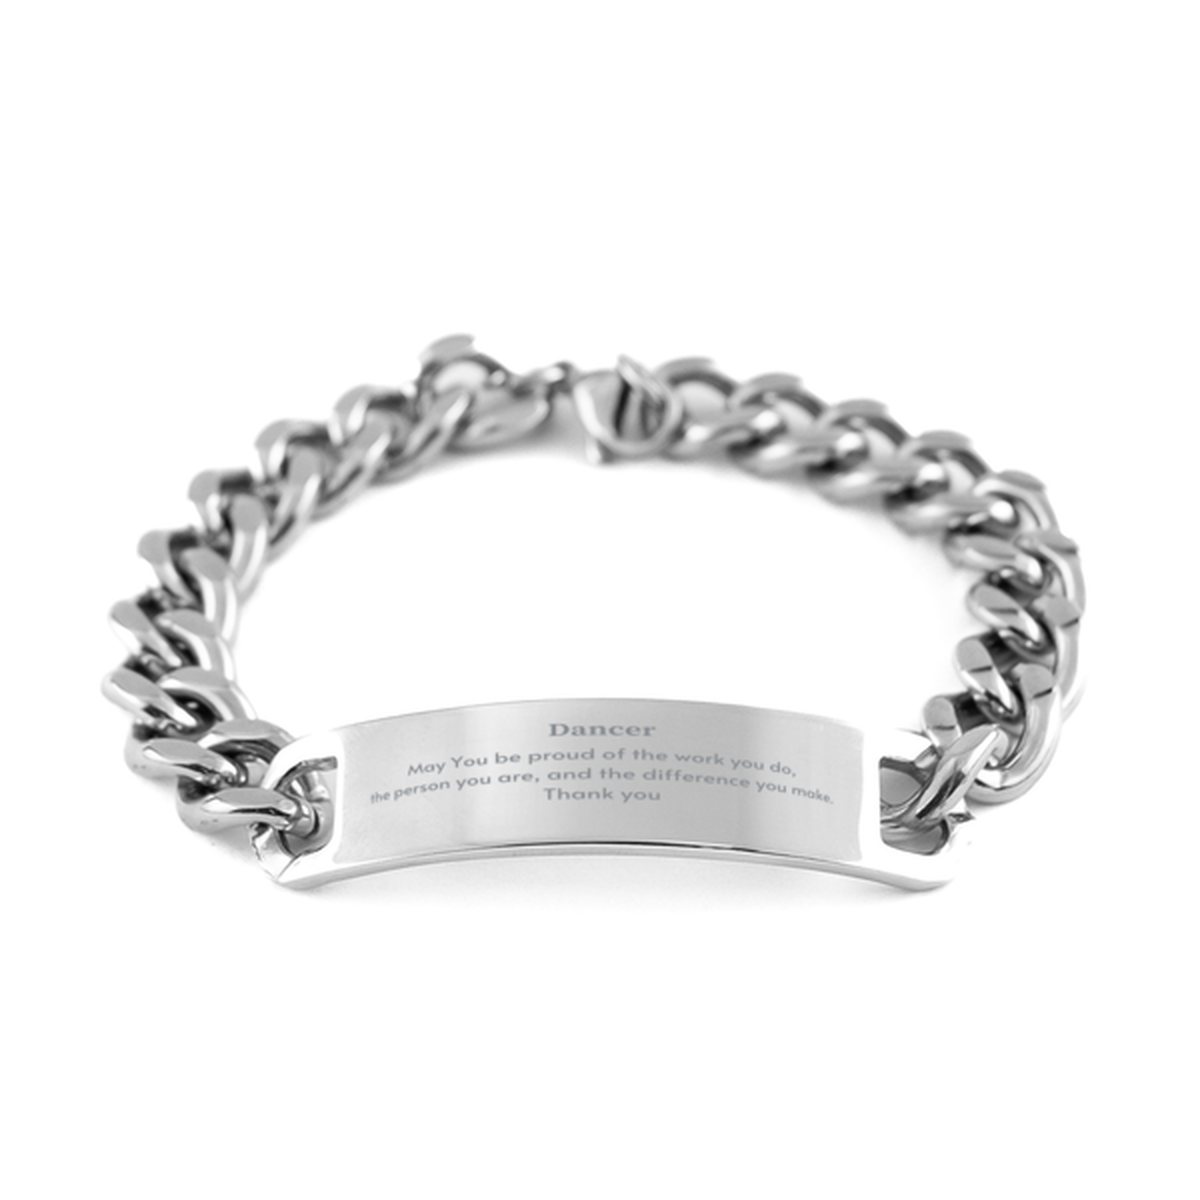 Heartwarming Cuban Chain Stainless Steel Bracelet Retirement Coworkers Gifts for Dancer, Dancer May You be proud of the work you do, the person you are Gifts for Boss Men Women Friends